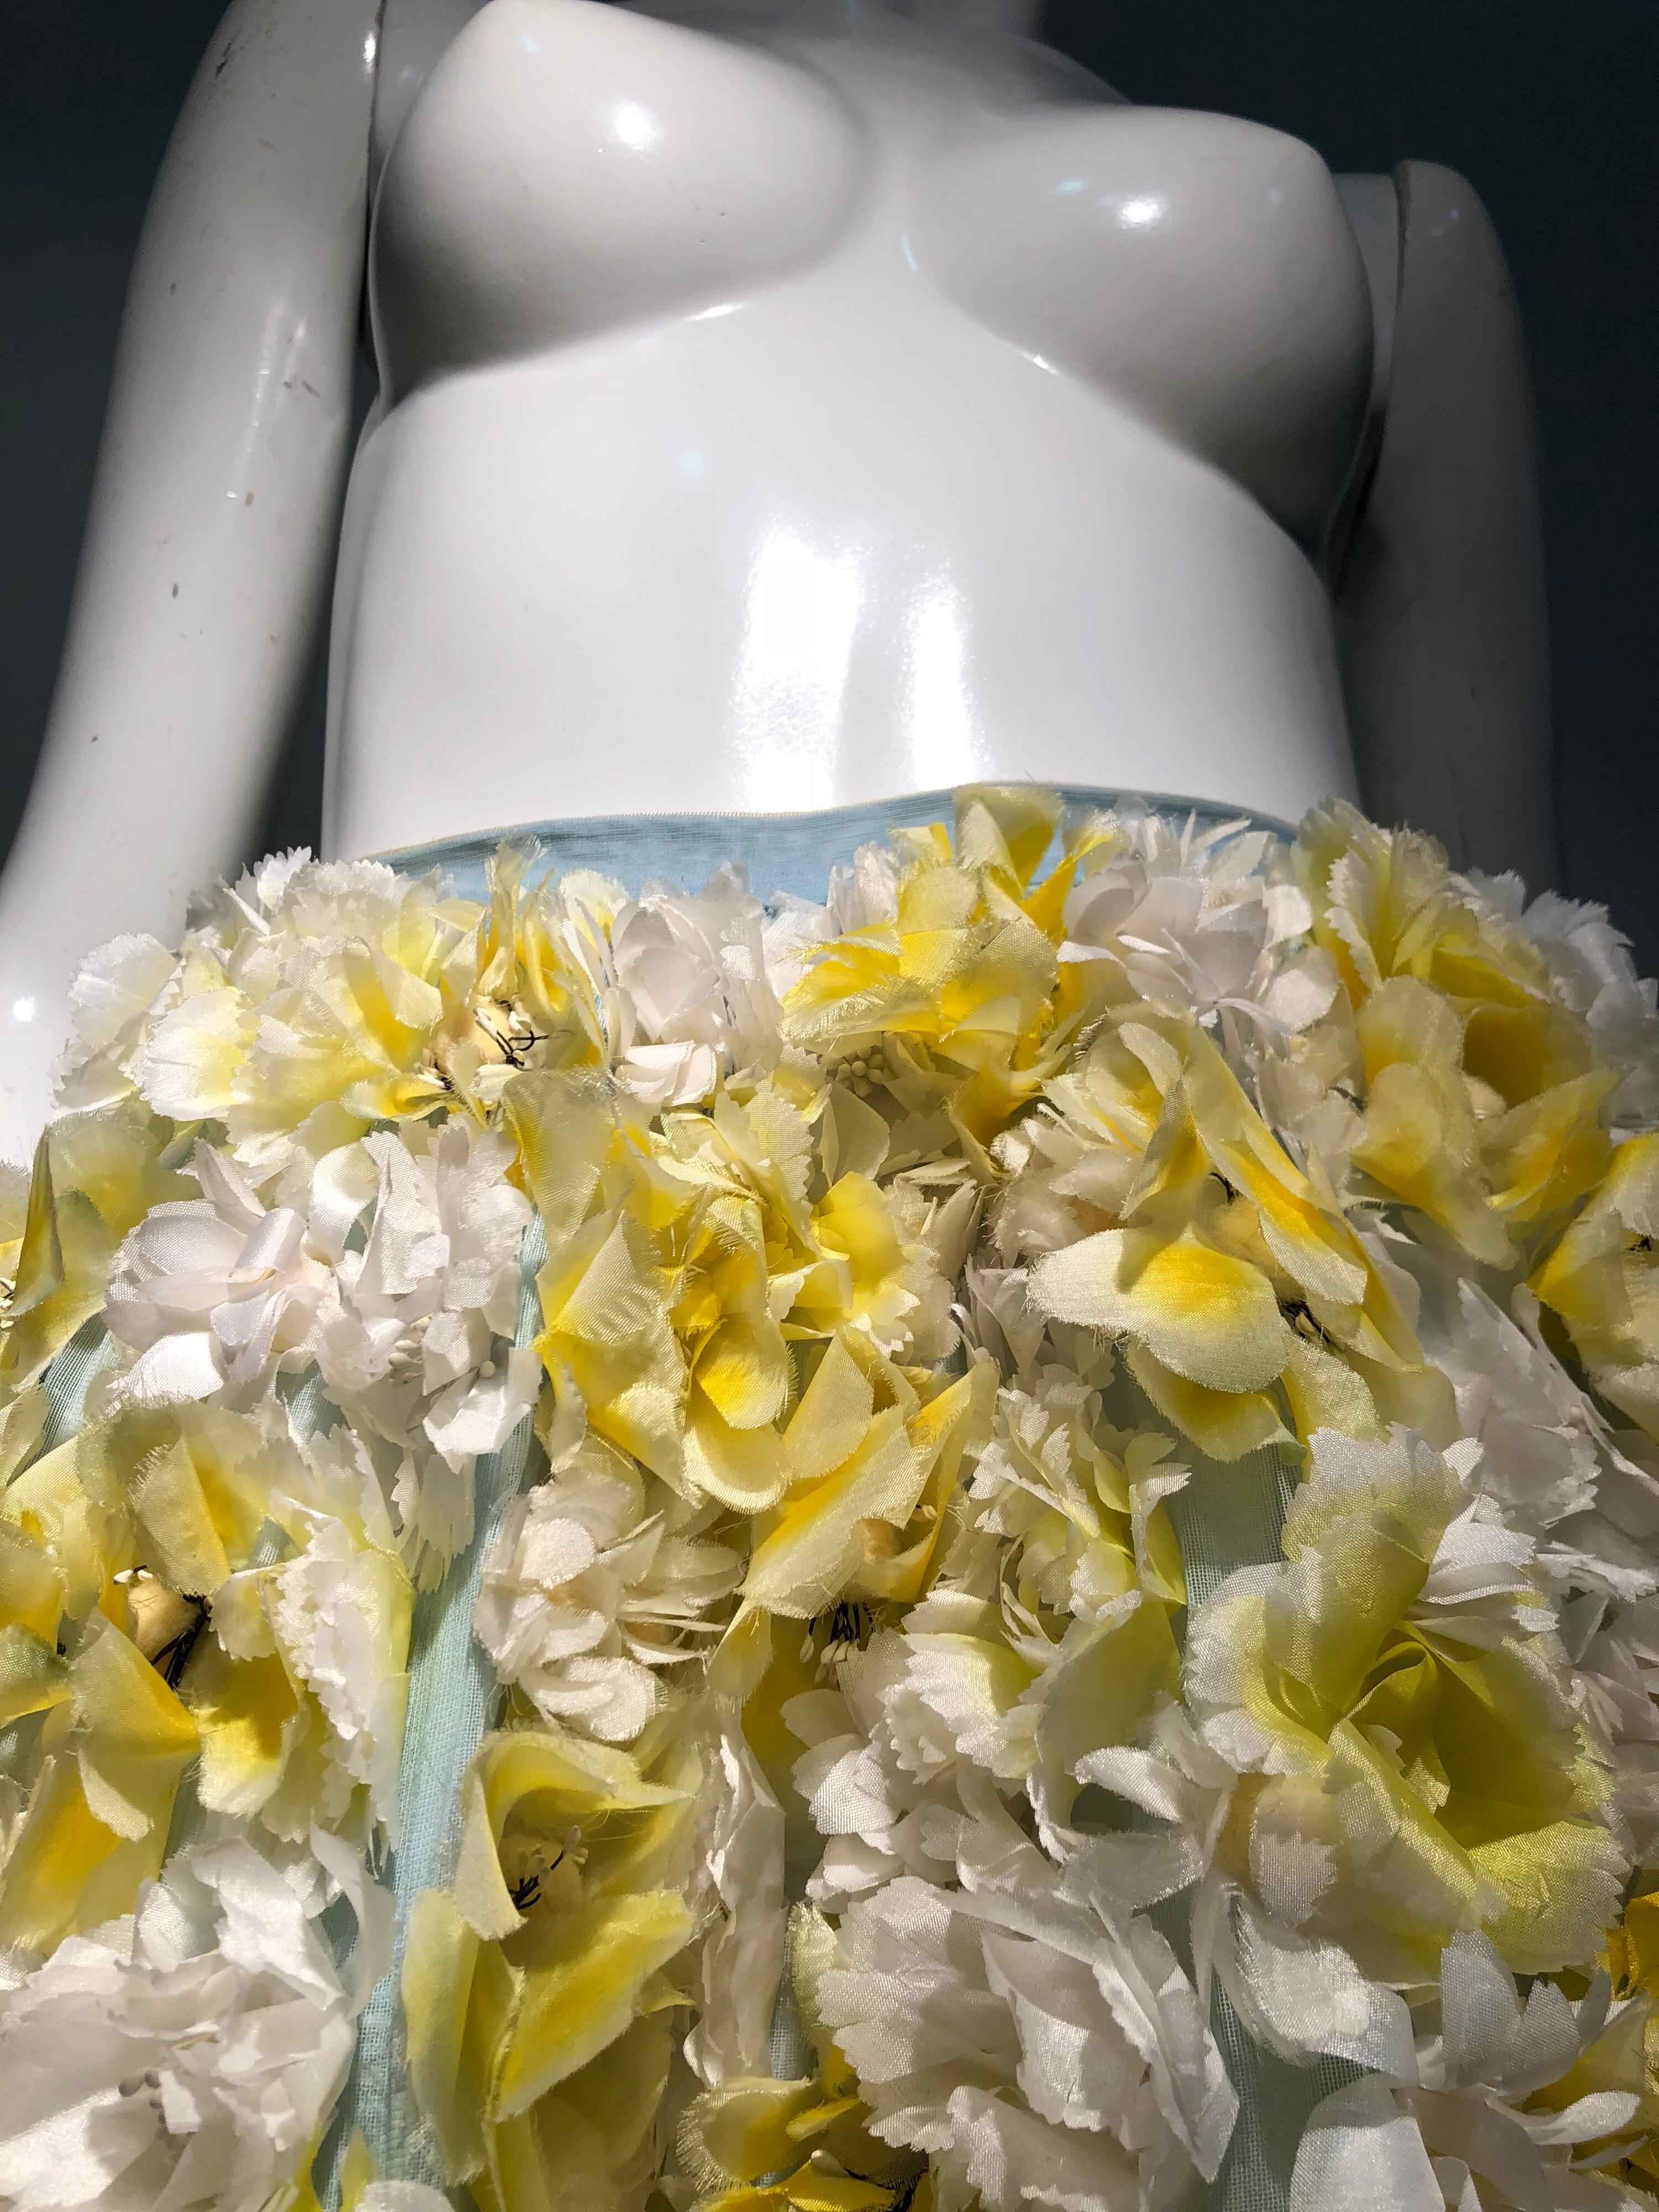 1960s Adolpho Floral Fantasy Ball Skirt In Yellow & White Silk Flowers 3